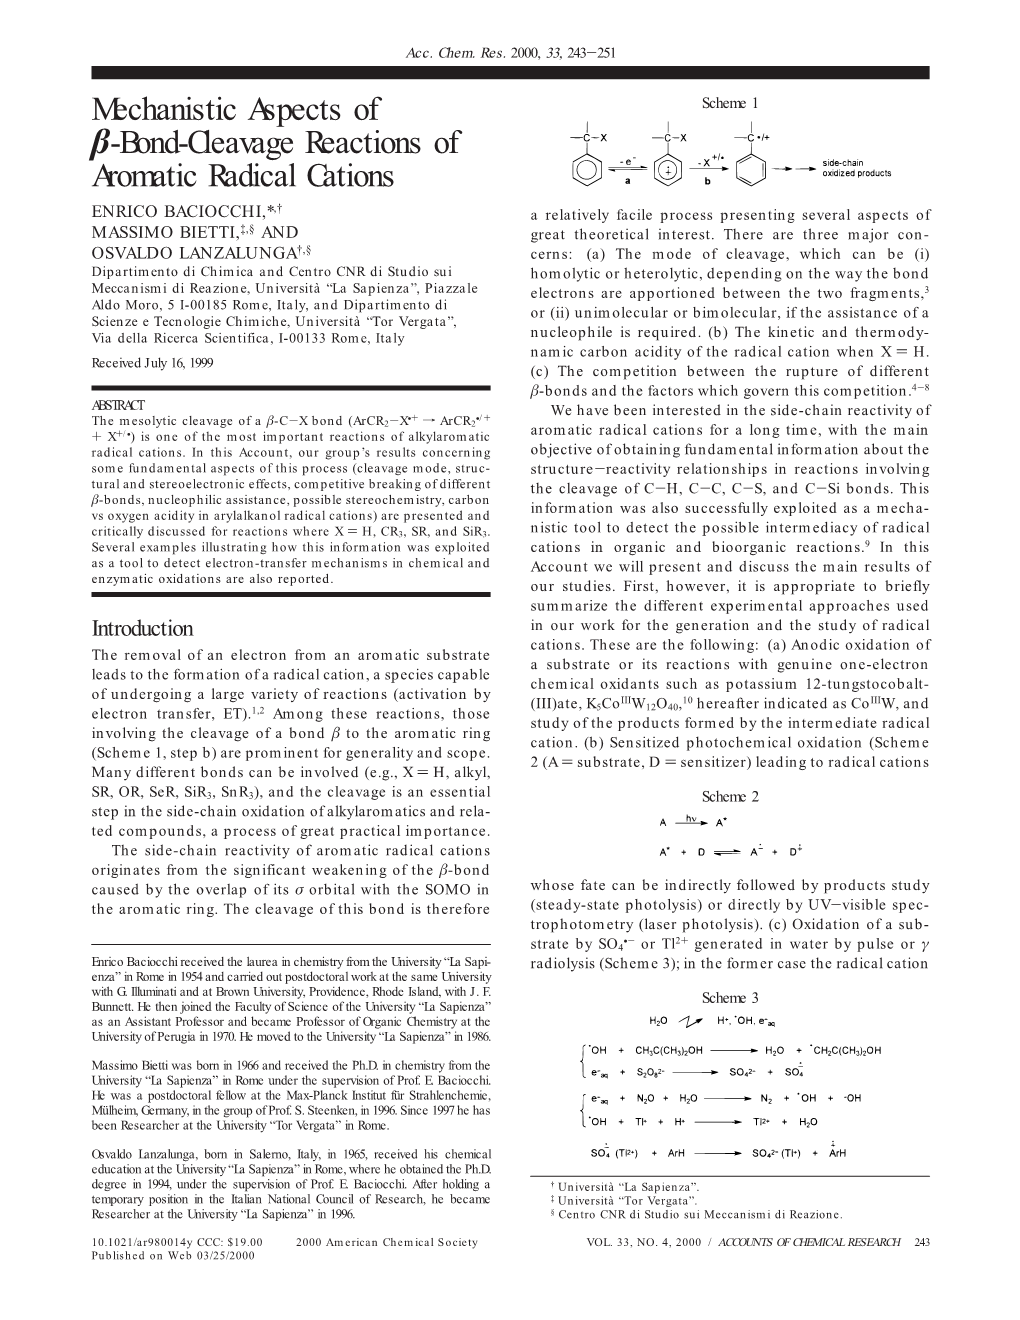 Mechanistic Aspects of Β-Bond-Cleavage Reactions Of